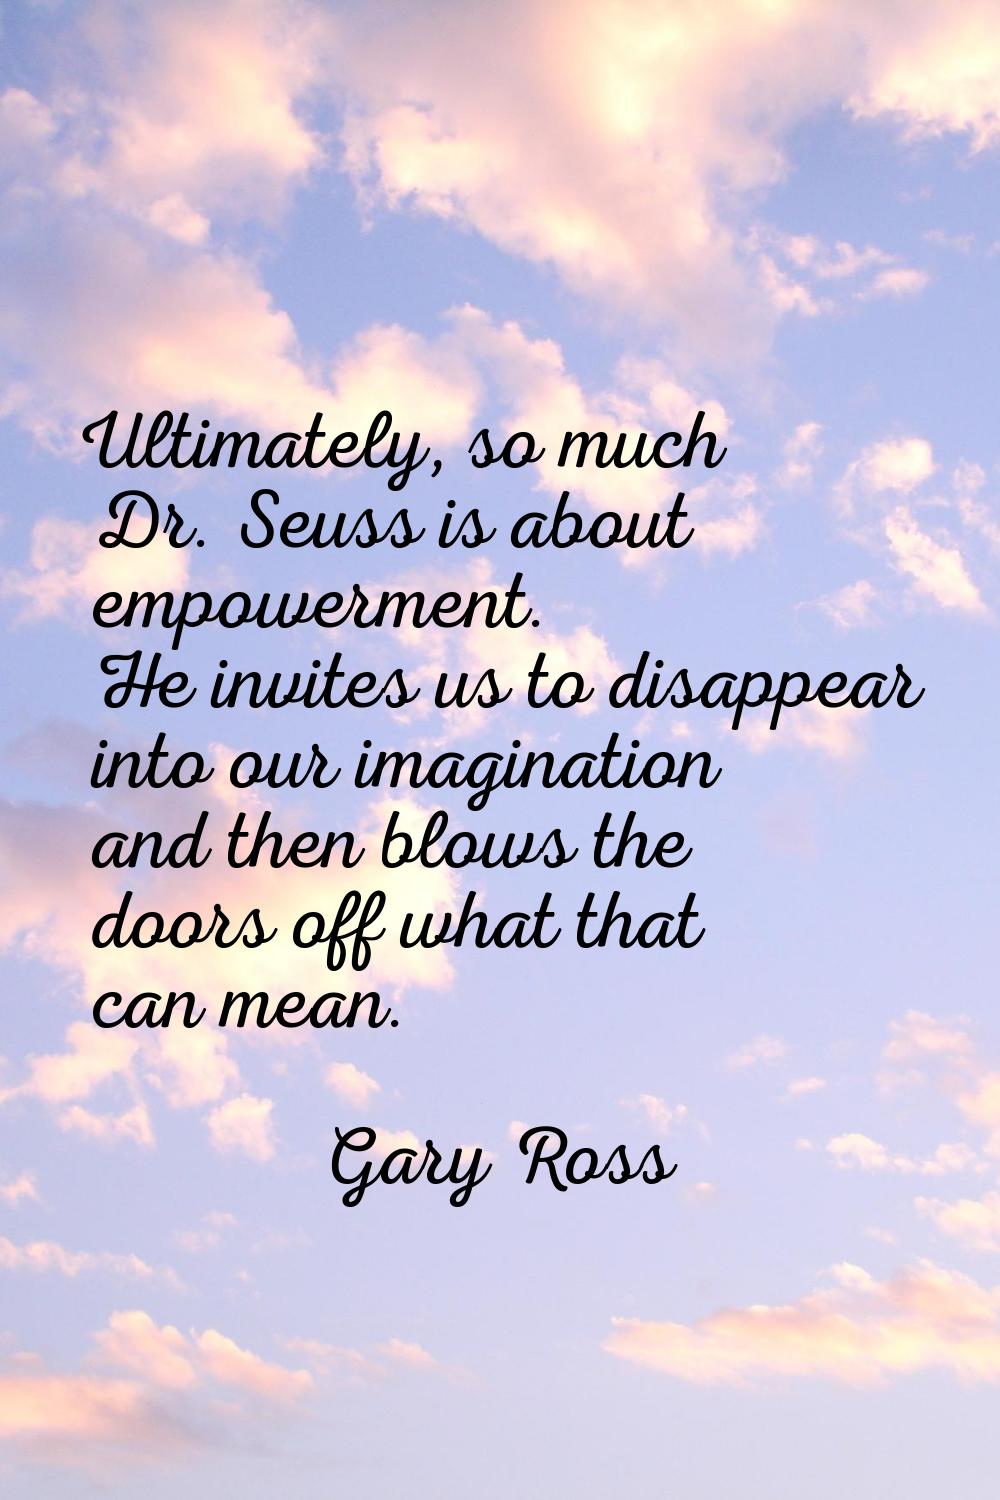 Ultimately, so much Dr. Seuss is about empowerment. He invites us to disappear into our imagination